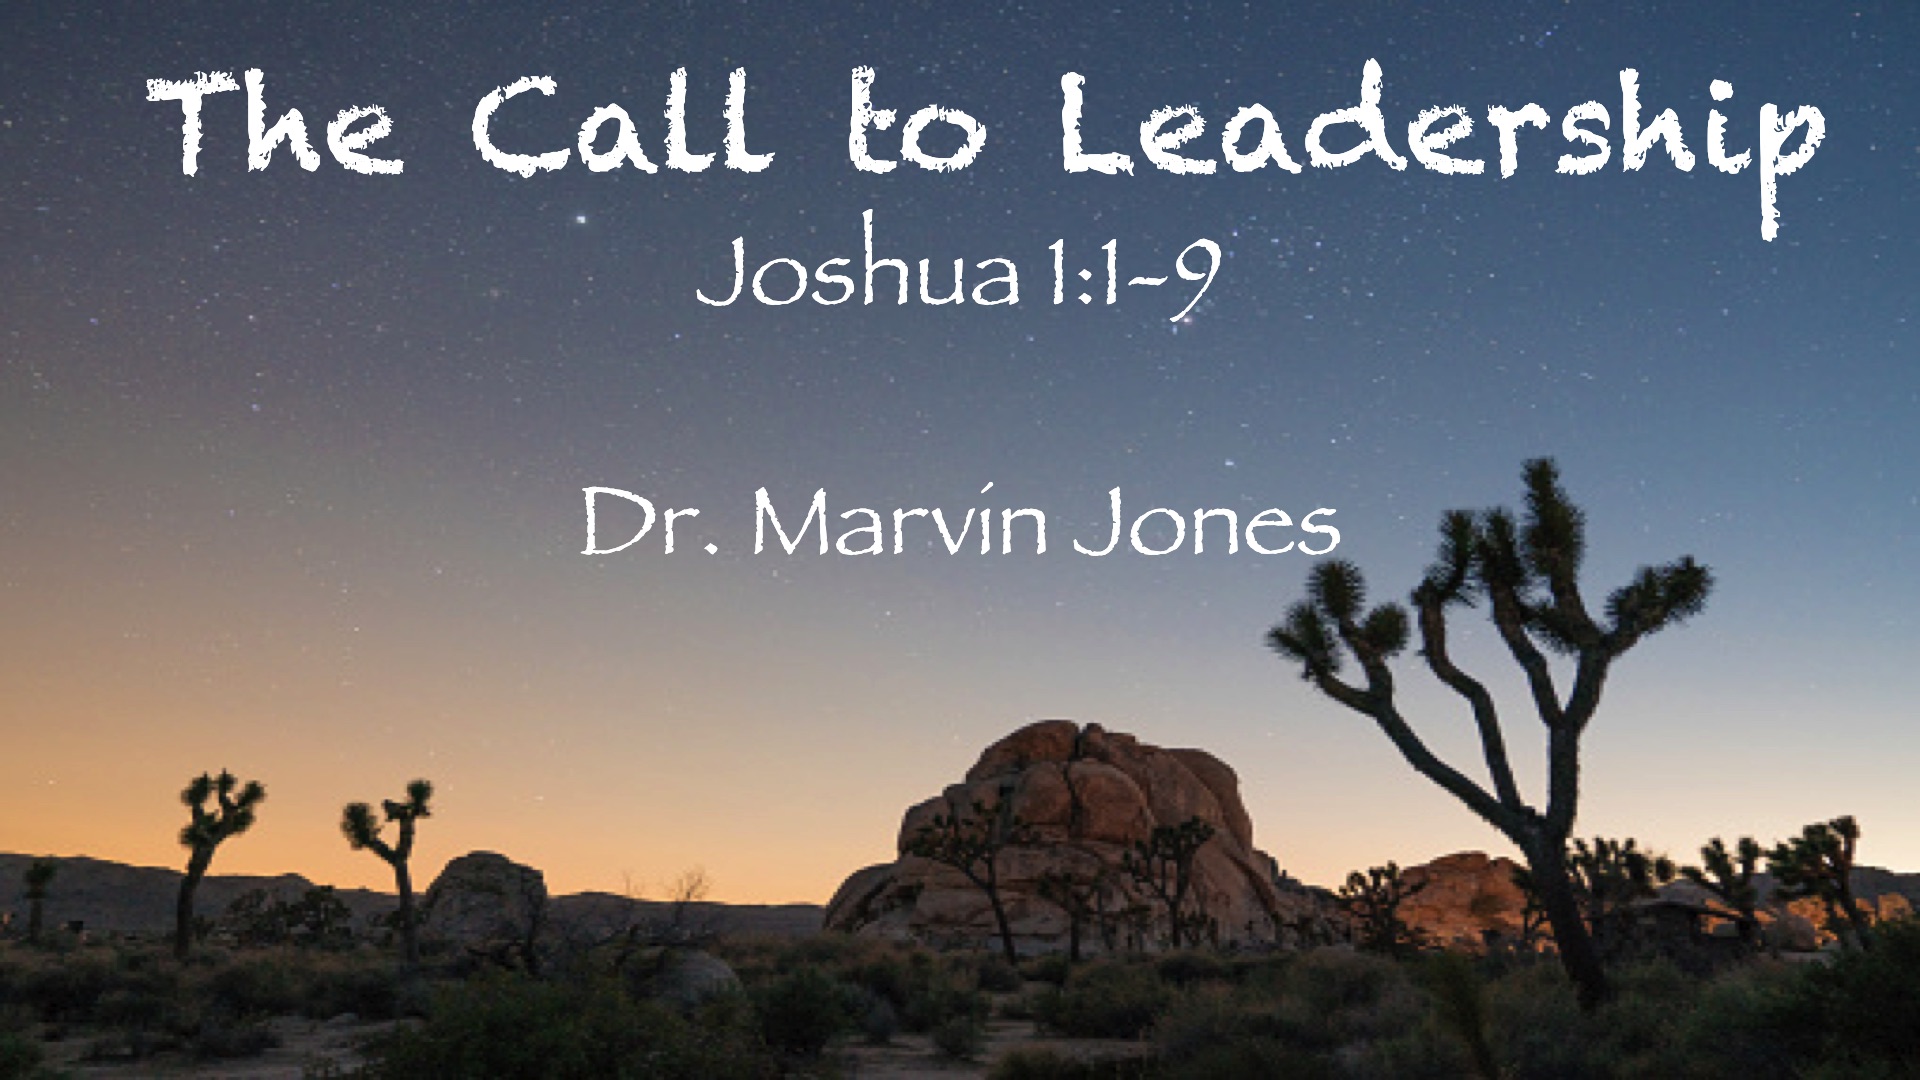 “The Call to Leadership”